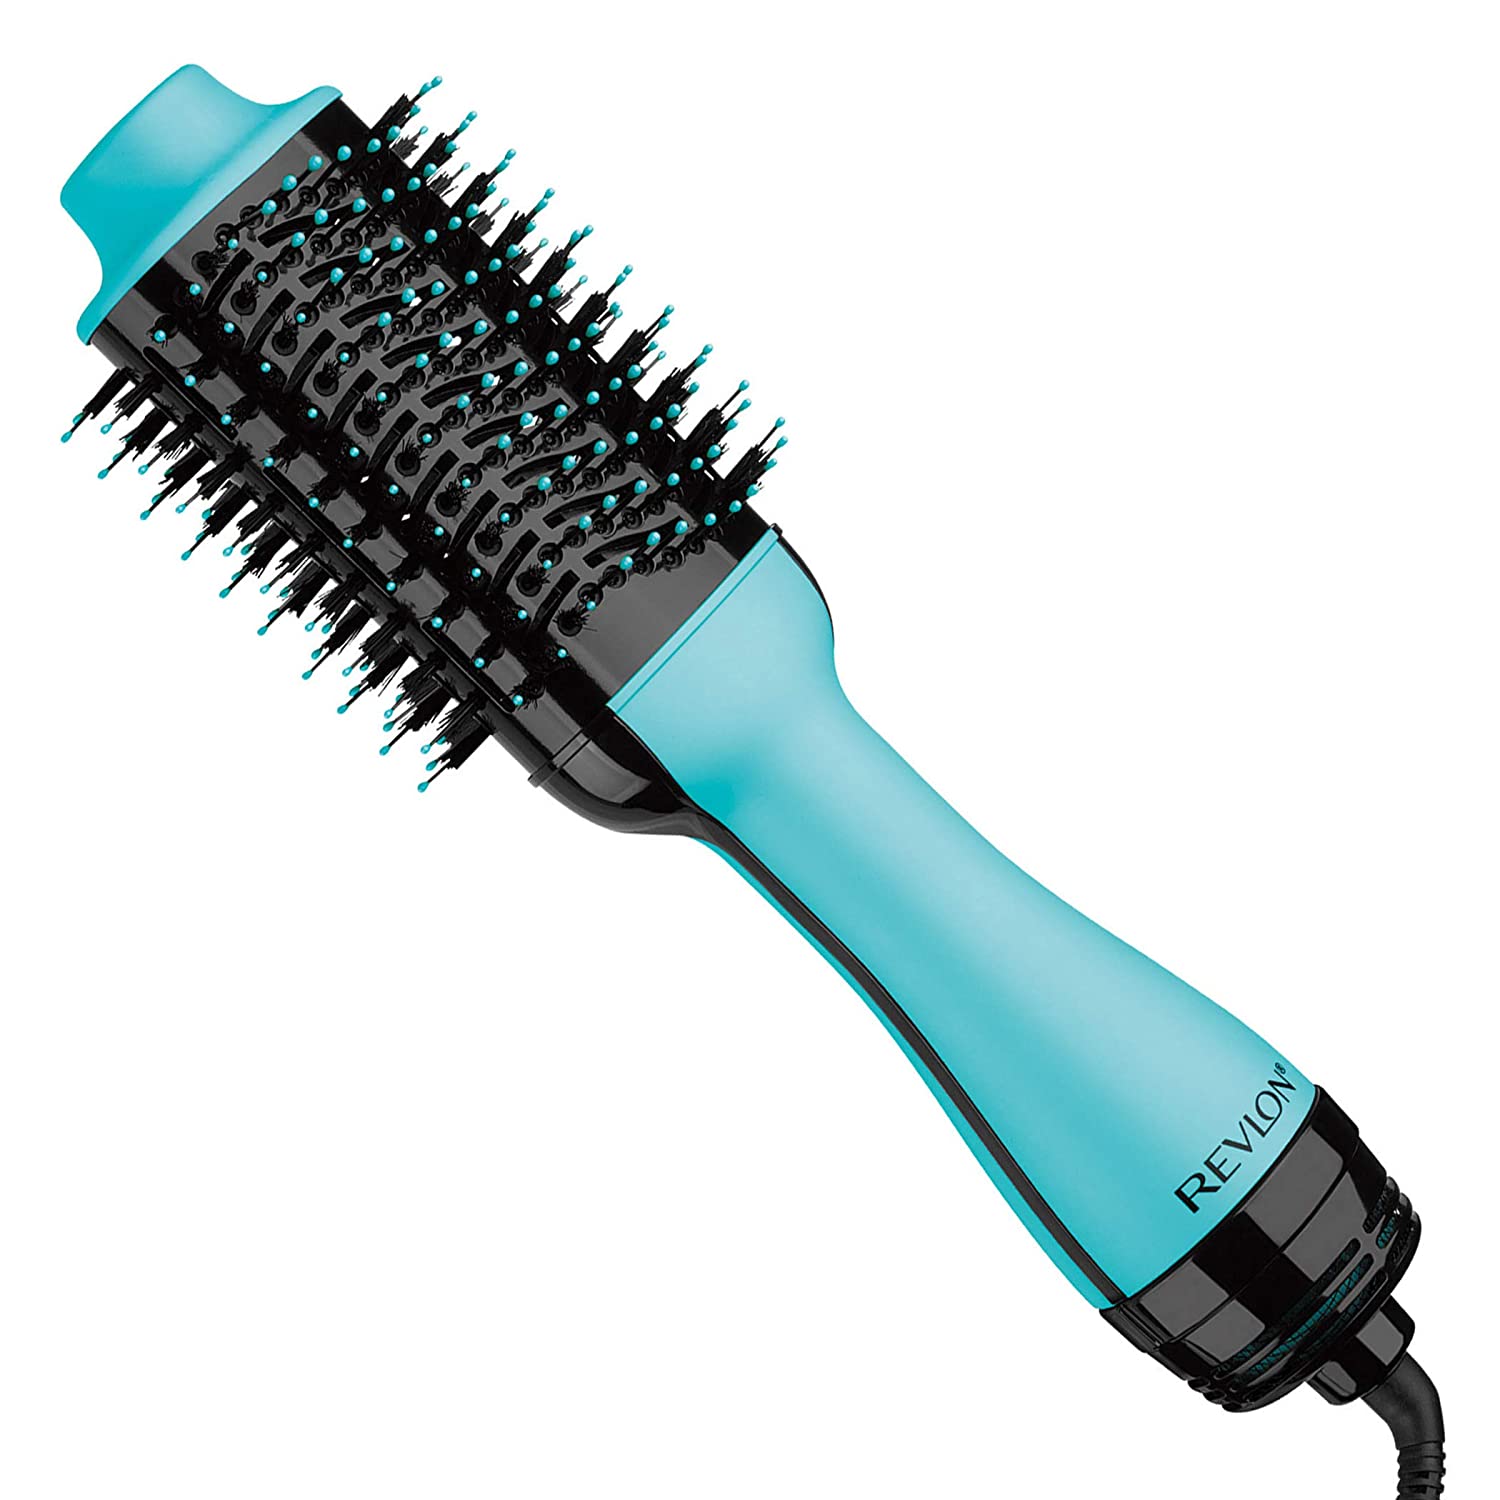 Revlon One-Step Hair Dryer and Volumizer Hot Air Brush (Mint/Turquoise) $29.99 + Free Shipping